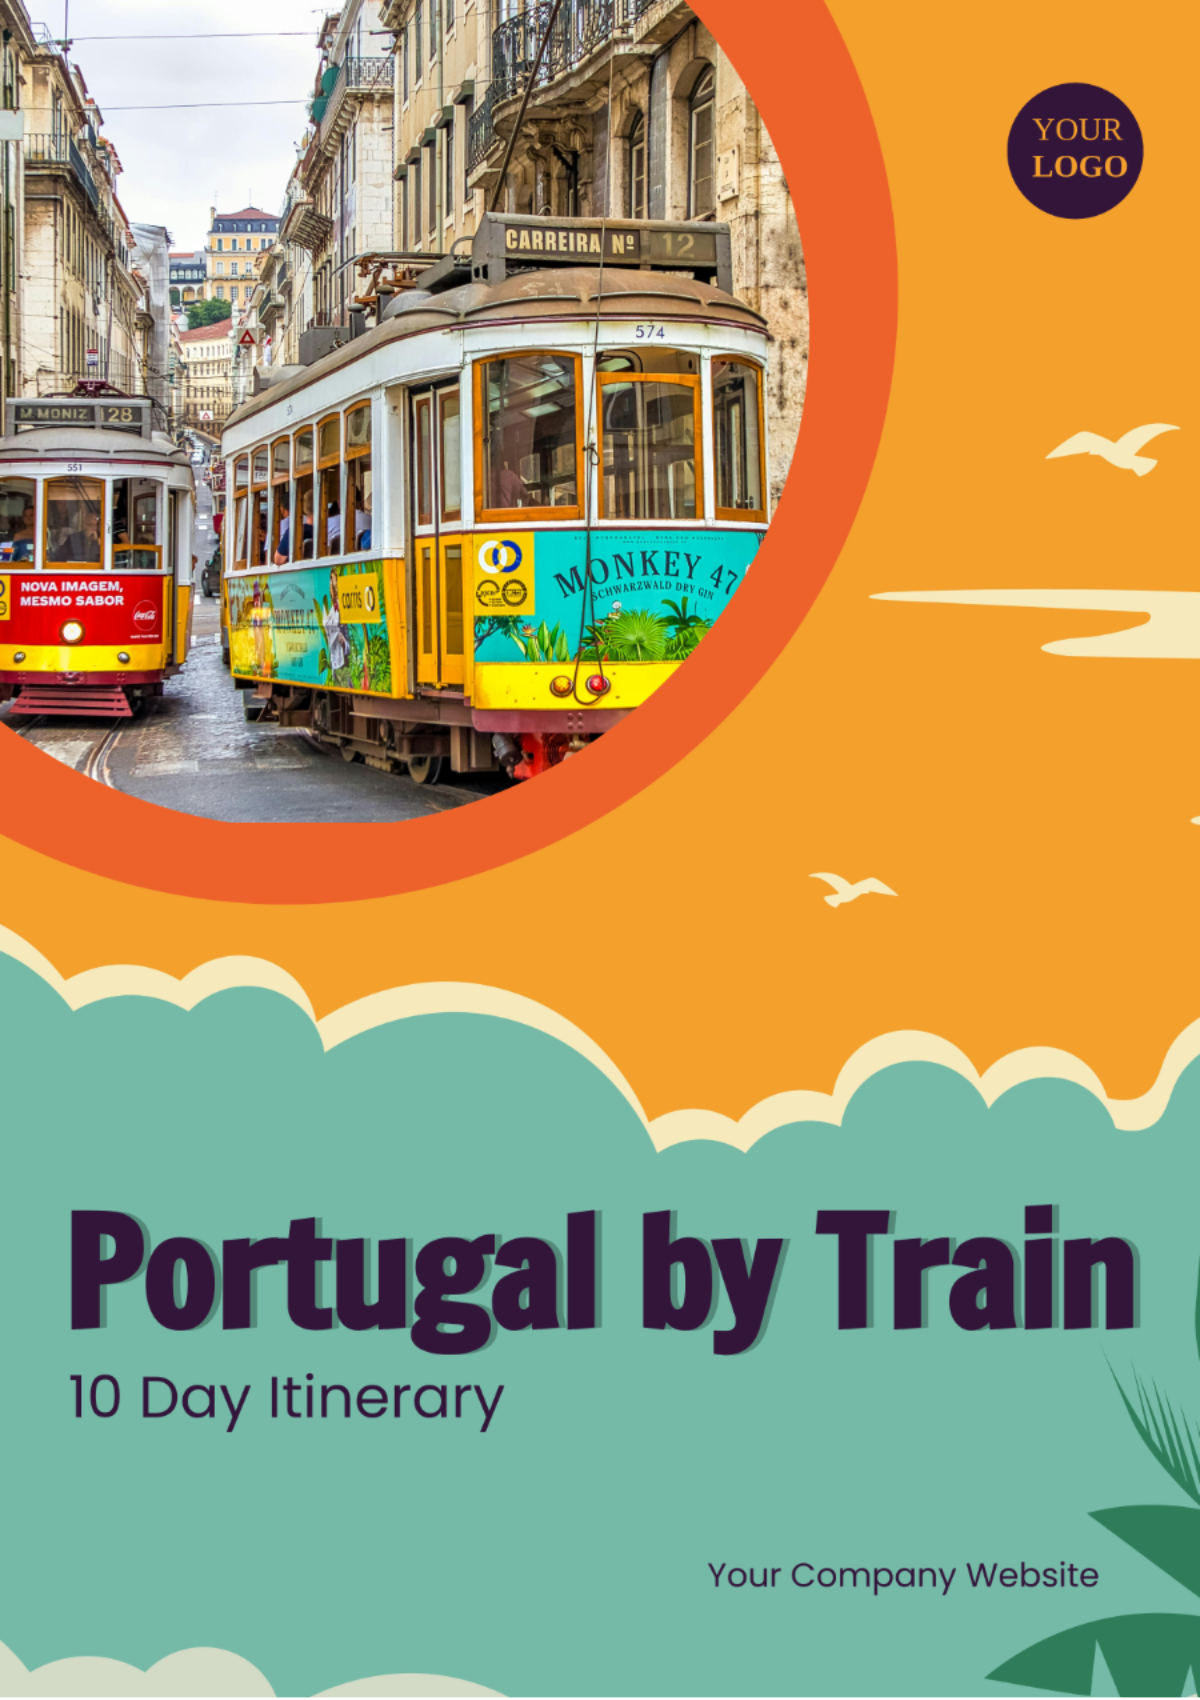 10 Day Portugal Itinerary By Train Template